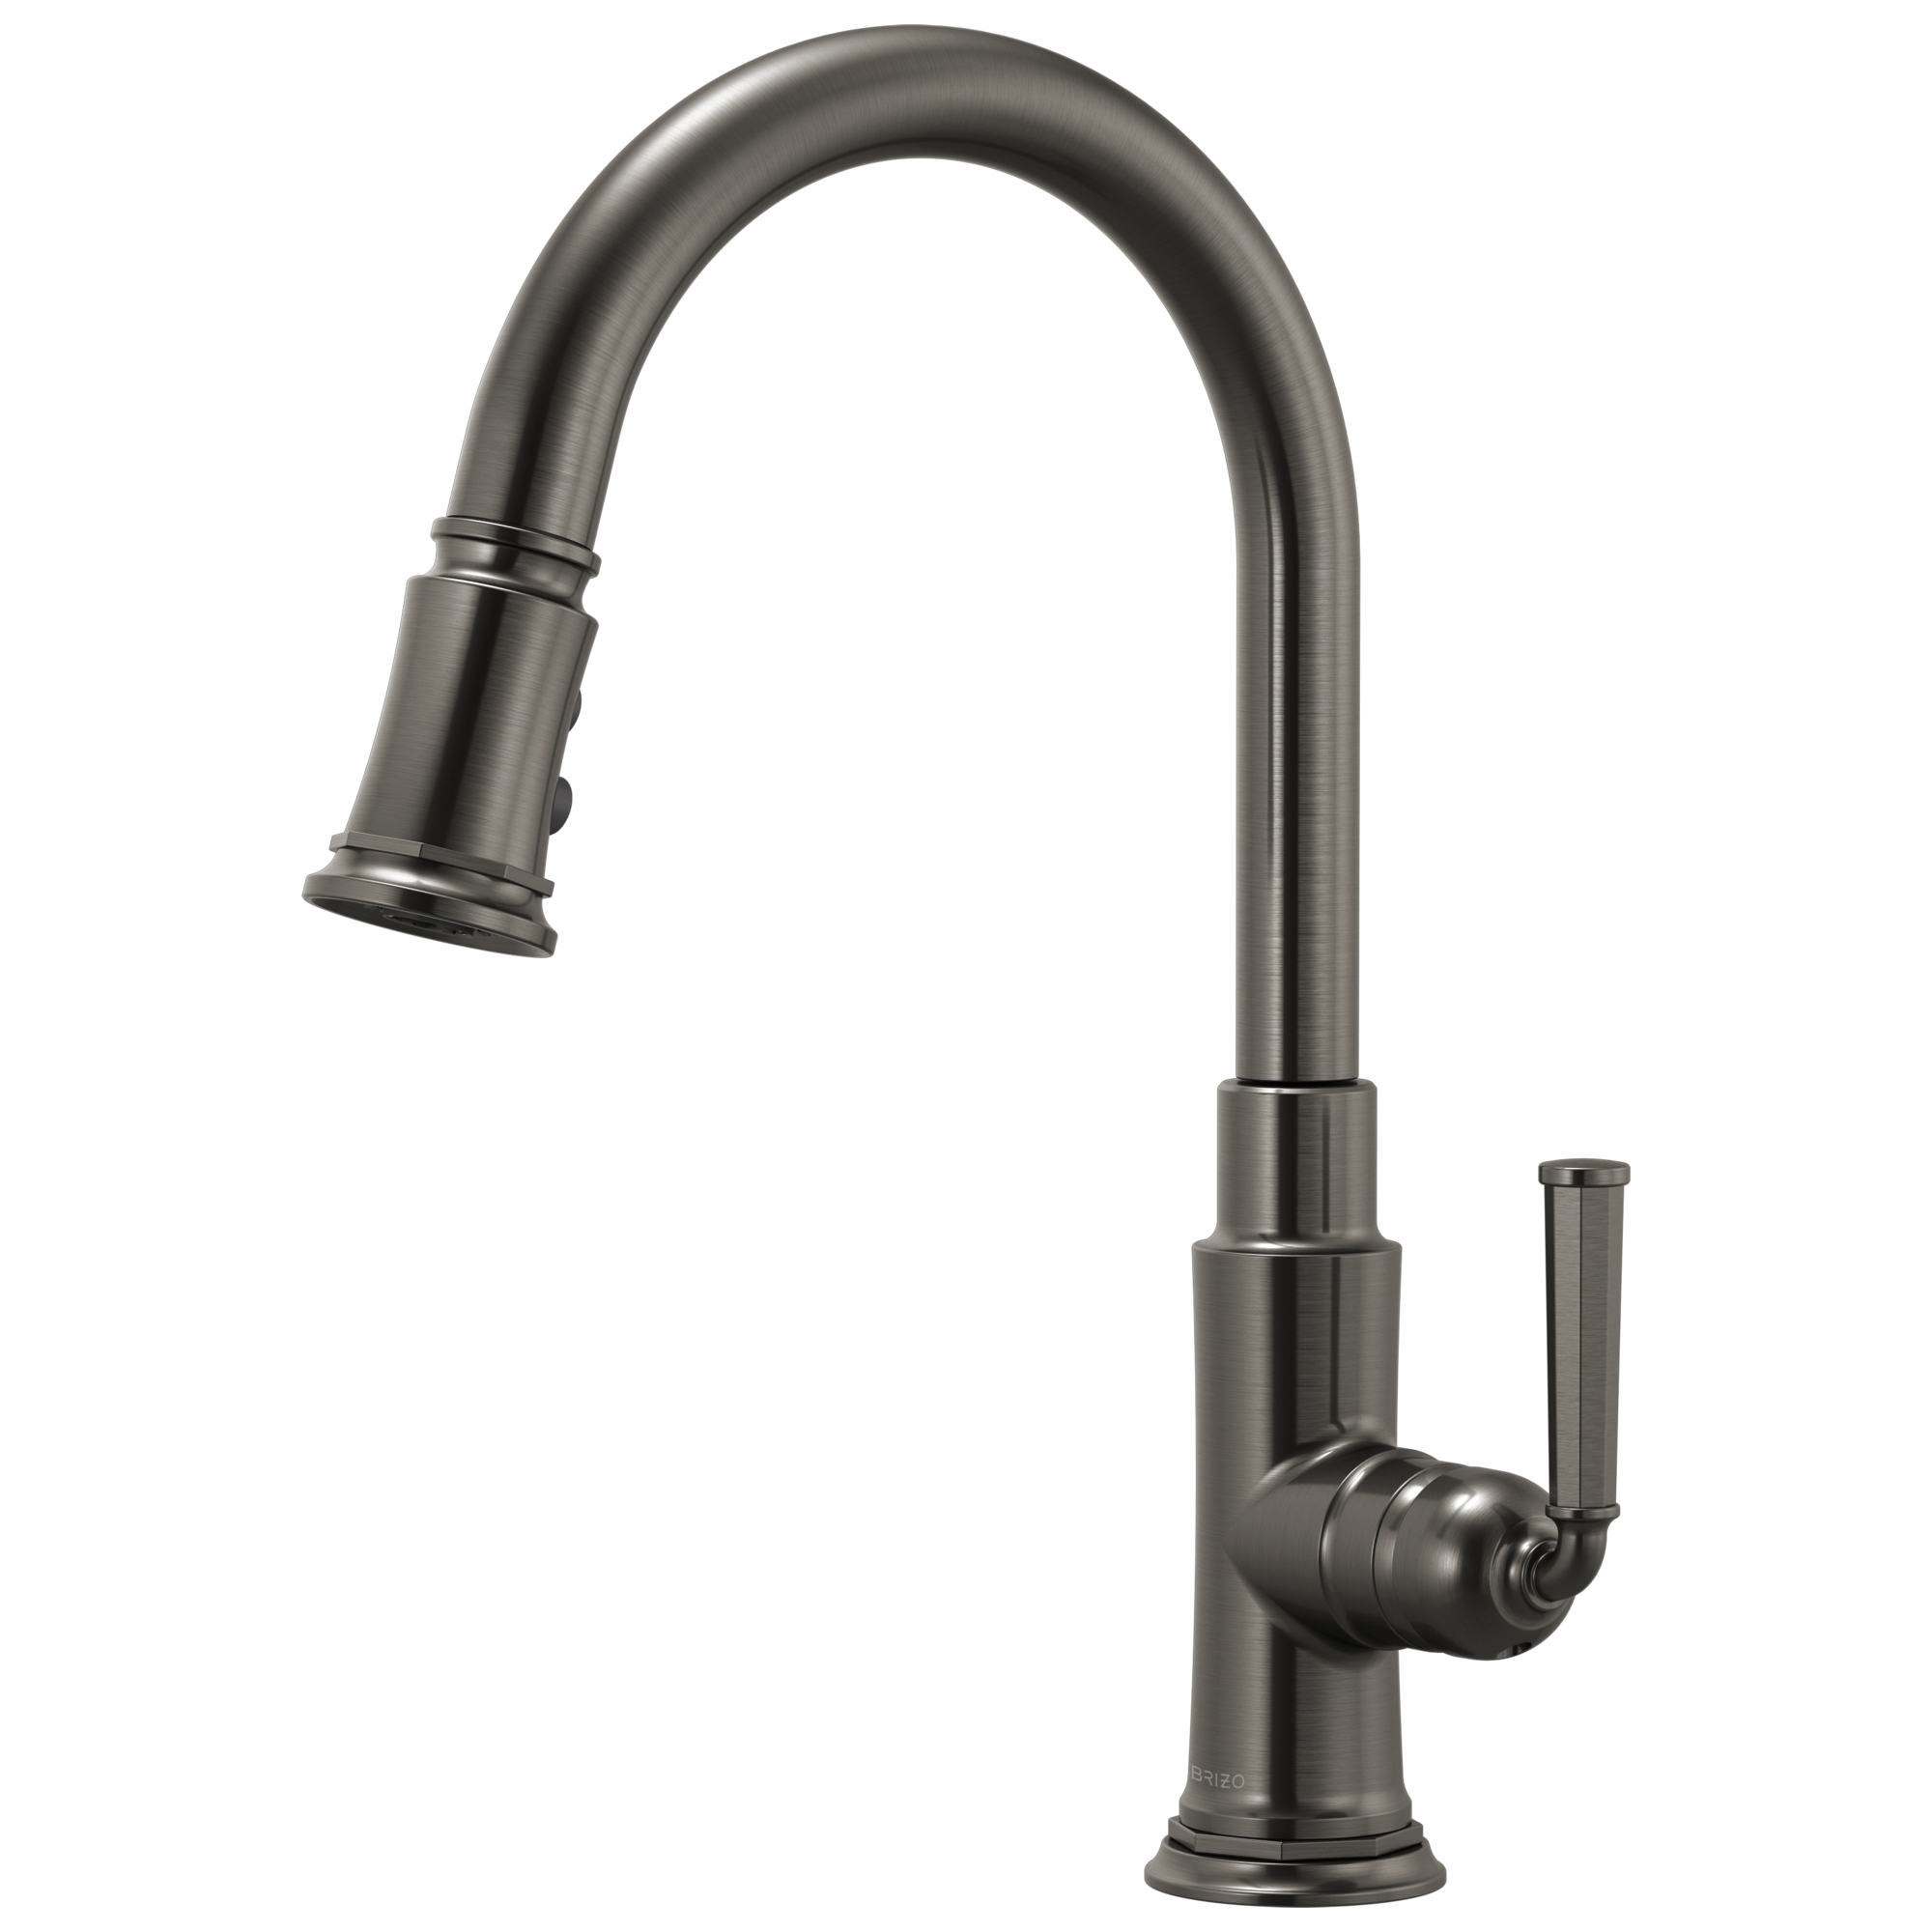 Brizo Rook Pull-Down Faucet